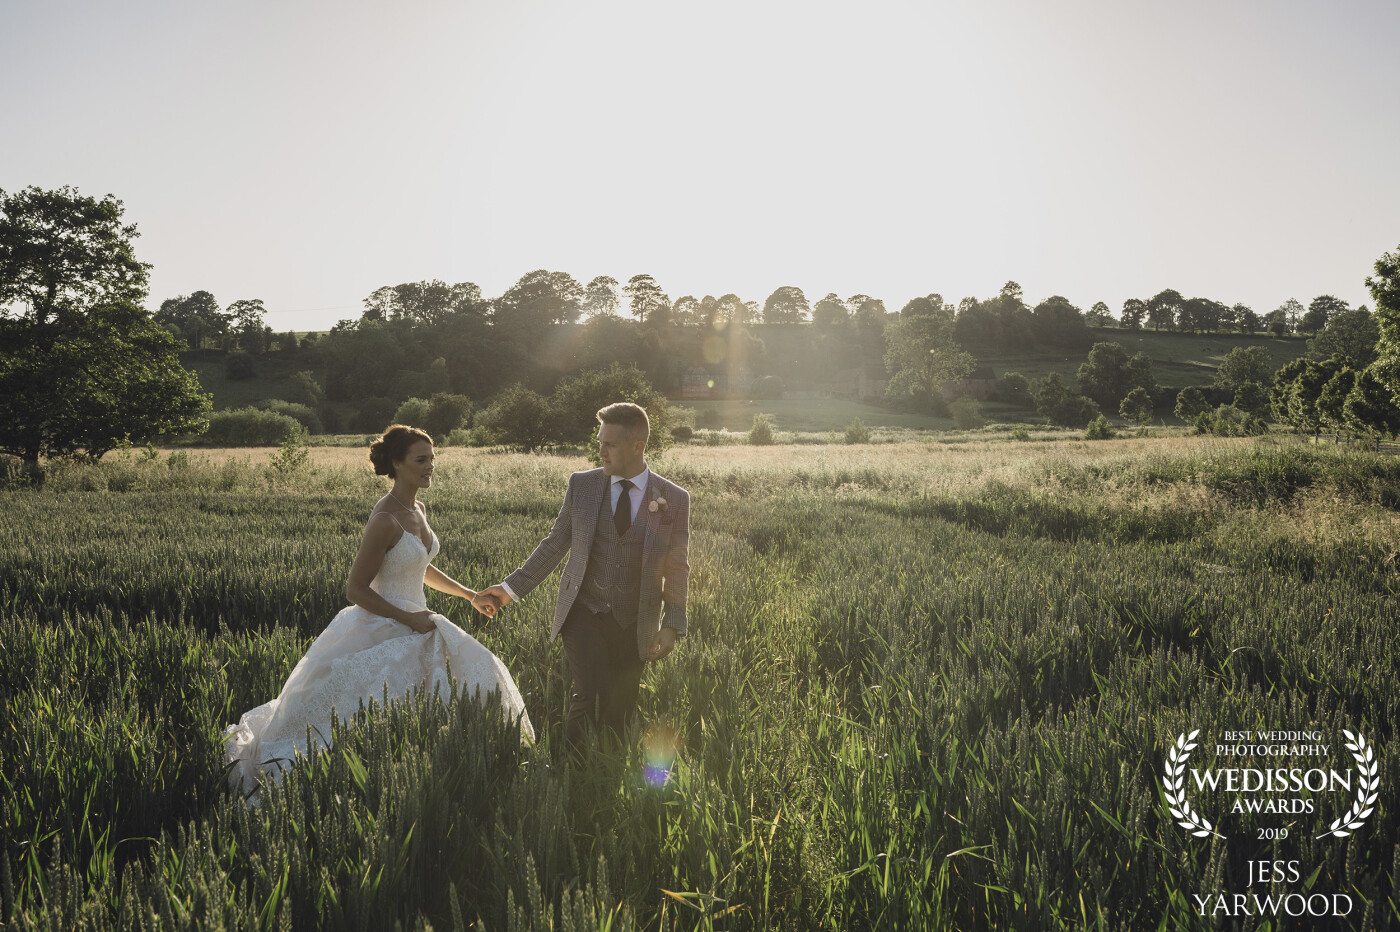 Shooting the wedding of Katie & James at The Ashes Wedding Barn in Staffordshire. We had a small window with golden light just before their first dance. <br />
<br />
Gorgeous golden light in a field of dreams!